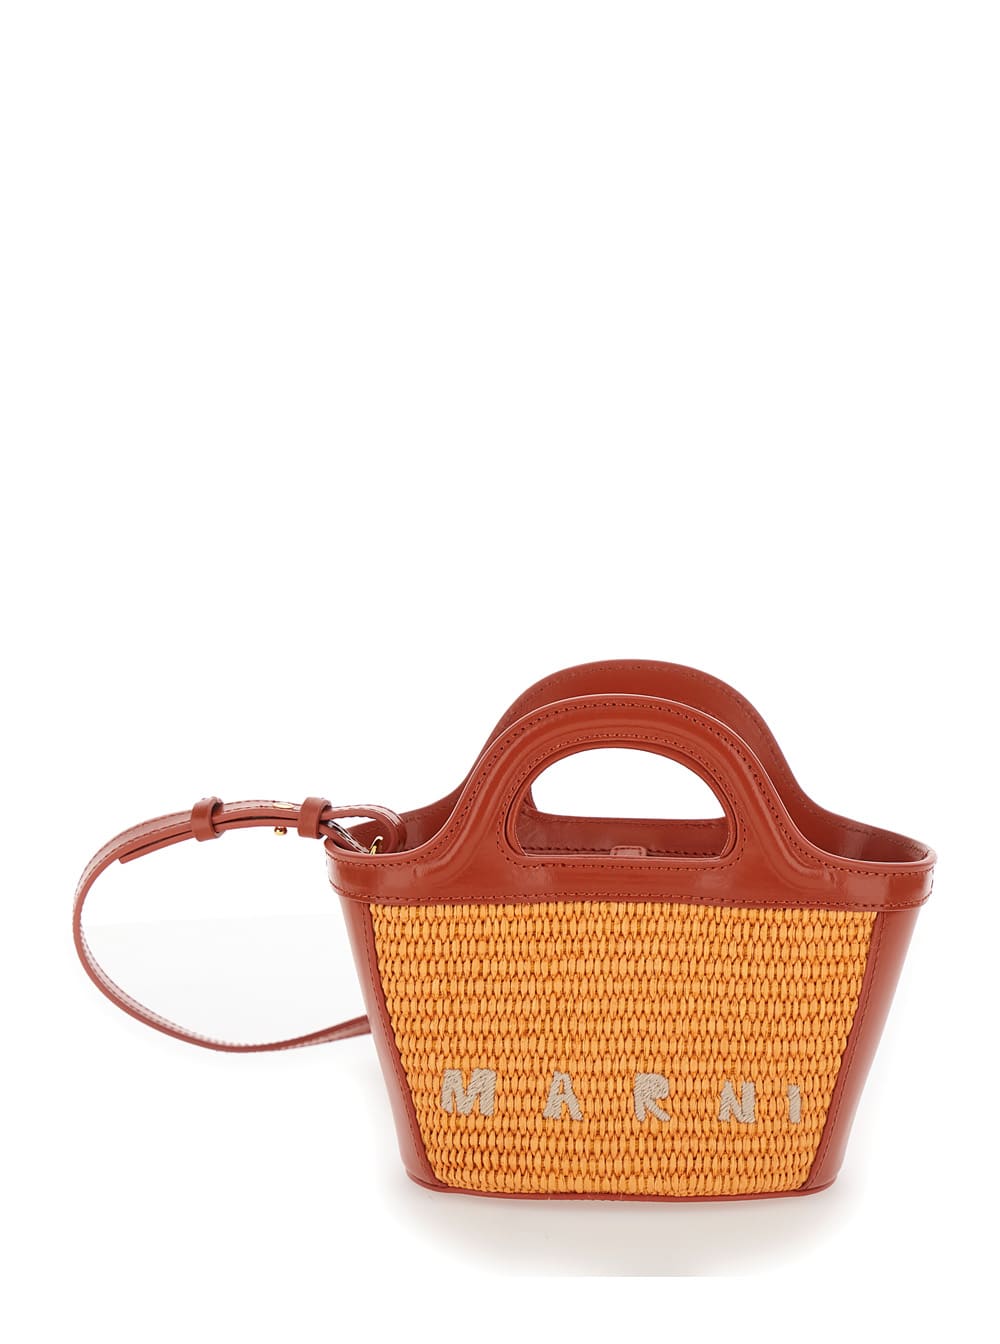 tropicalia Micro Beige Handbag With Logo Lettering Detail In Leather And Rafia Effect Fabric Woman